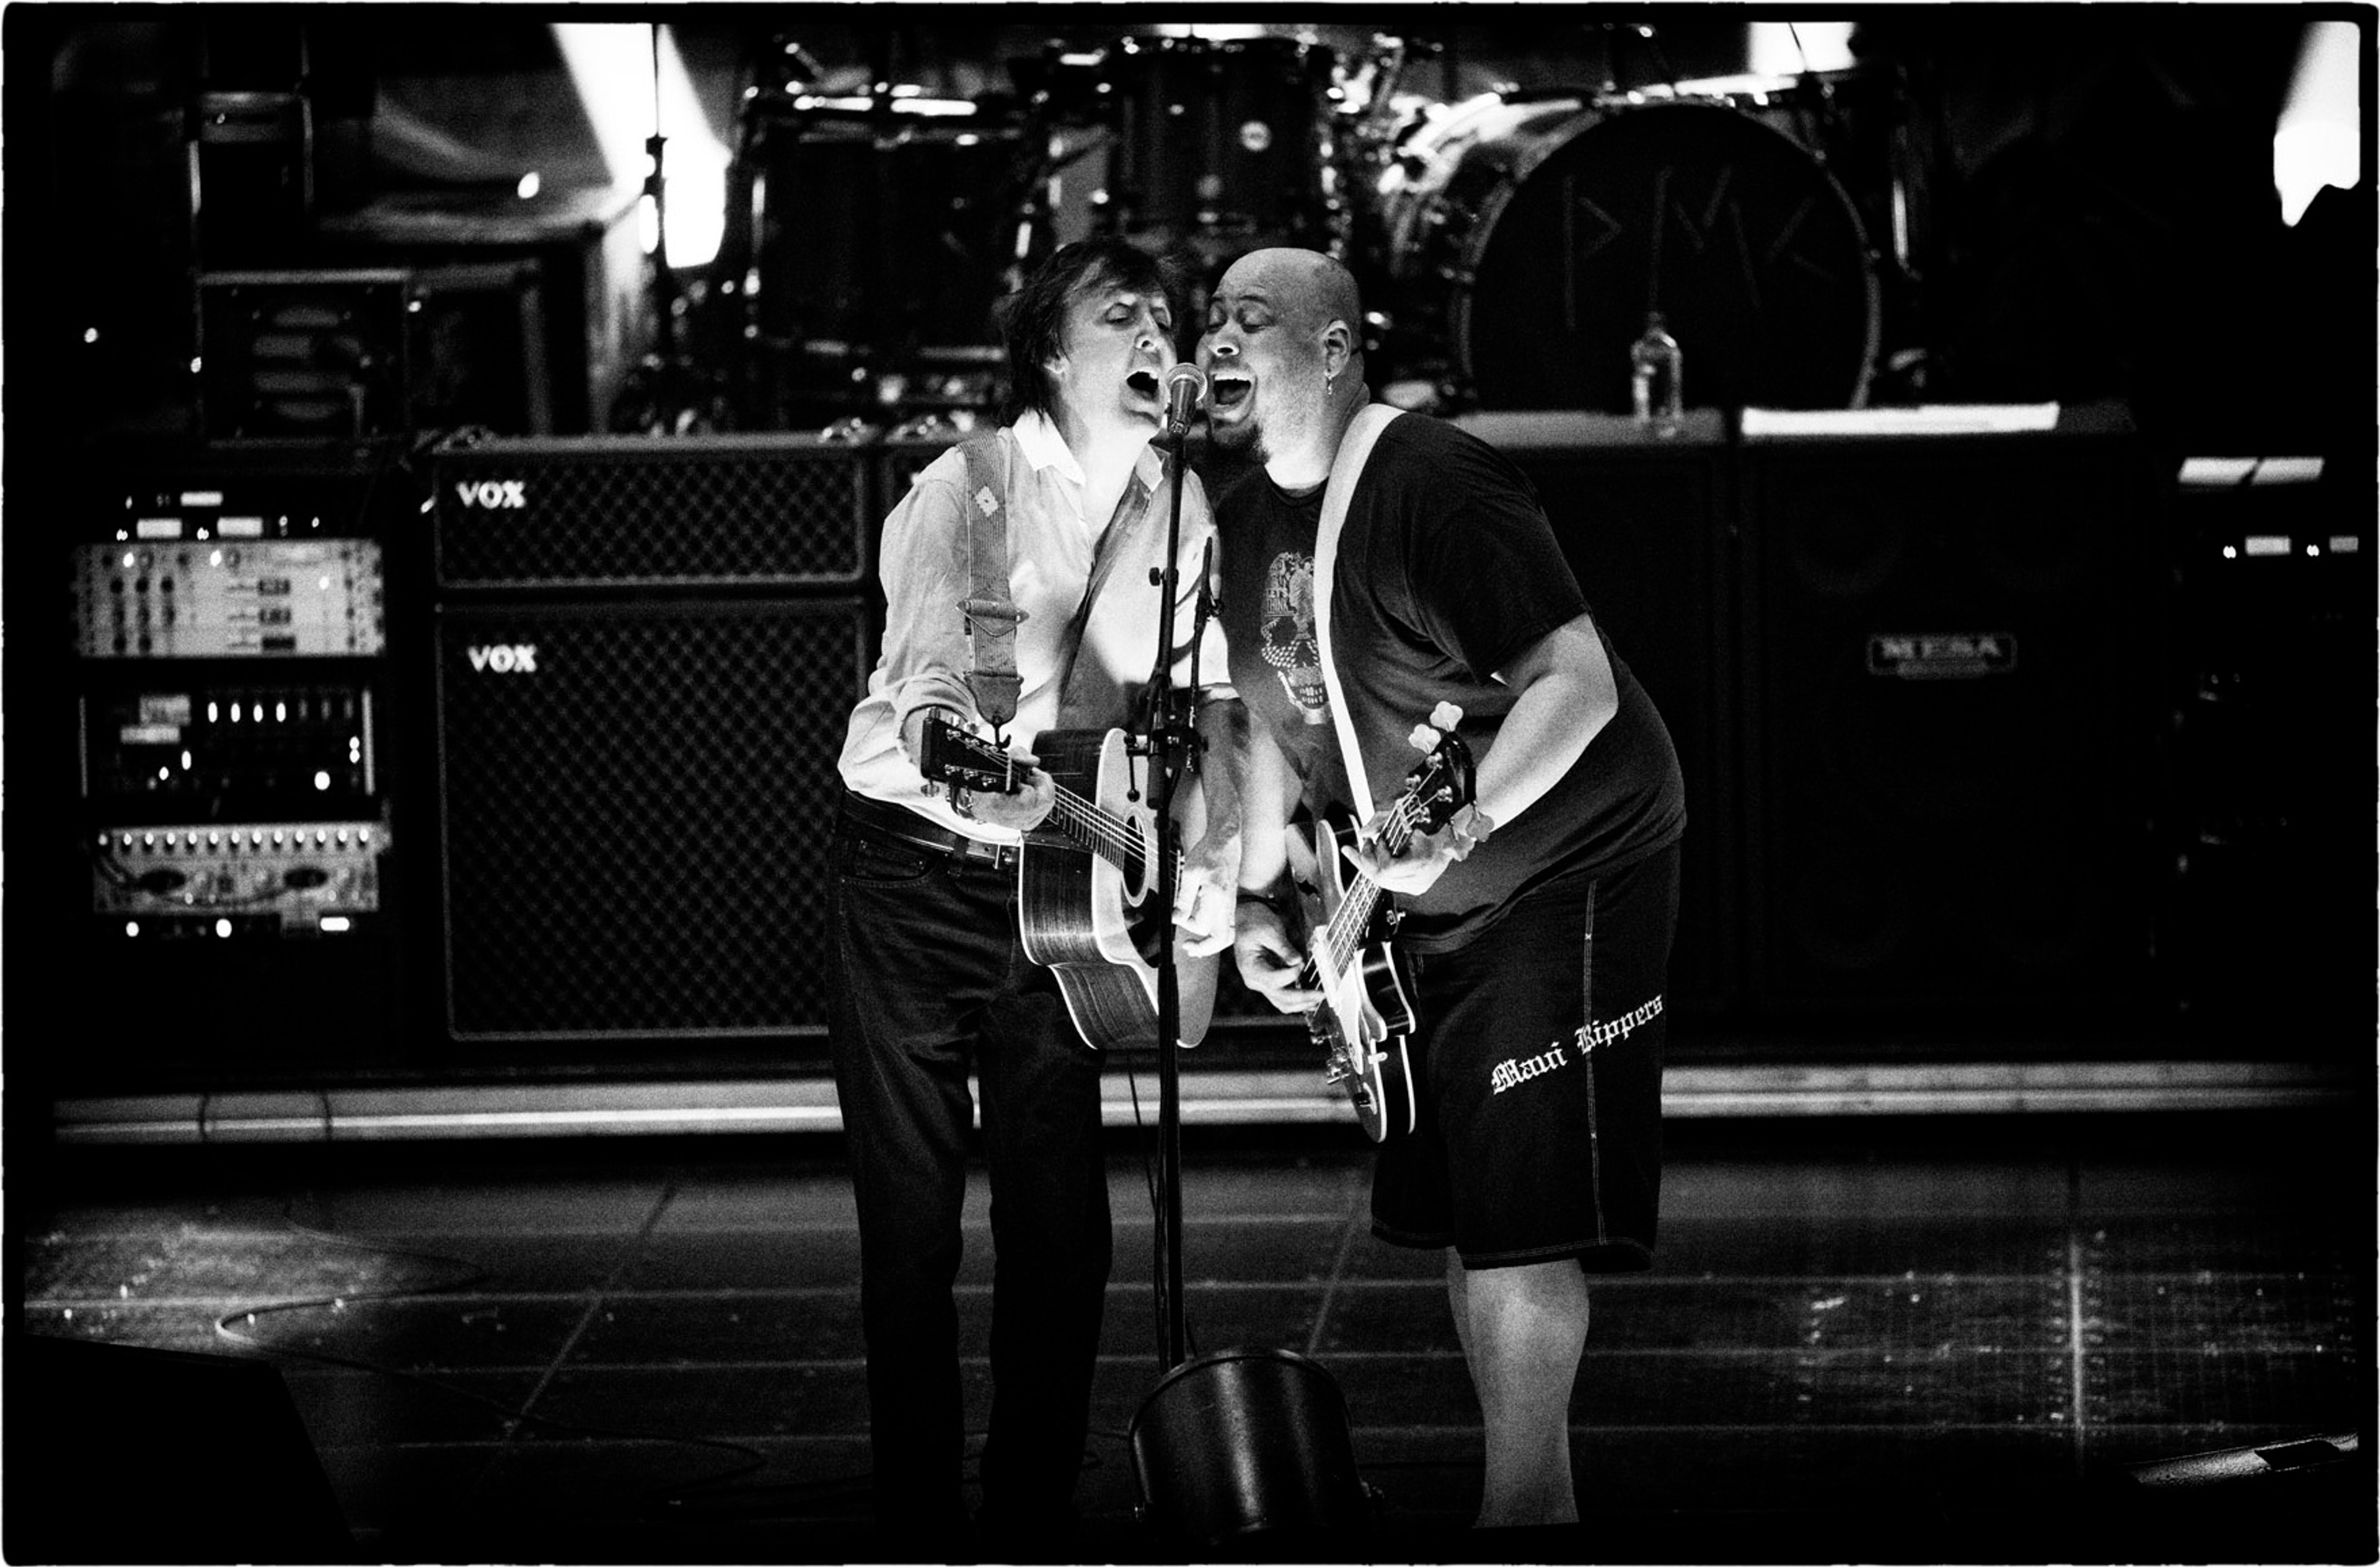 Paul and Abe sharing a mic at rehearsals, Los Angeles, April 13th 2013